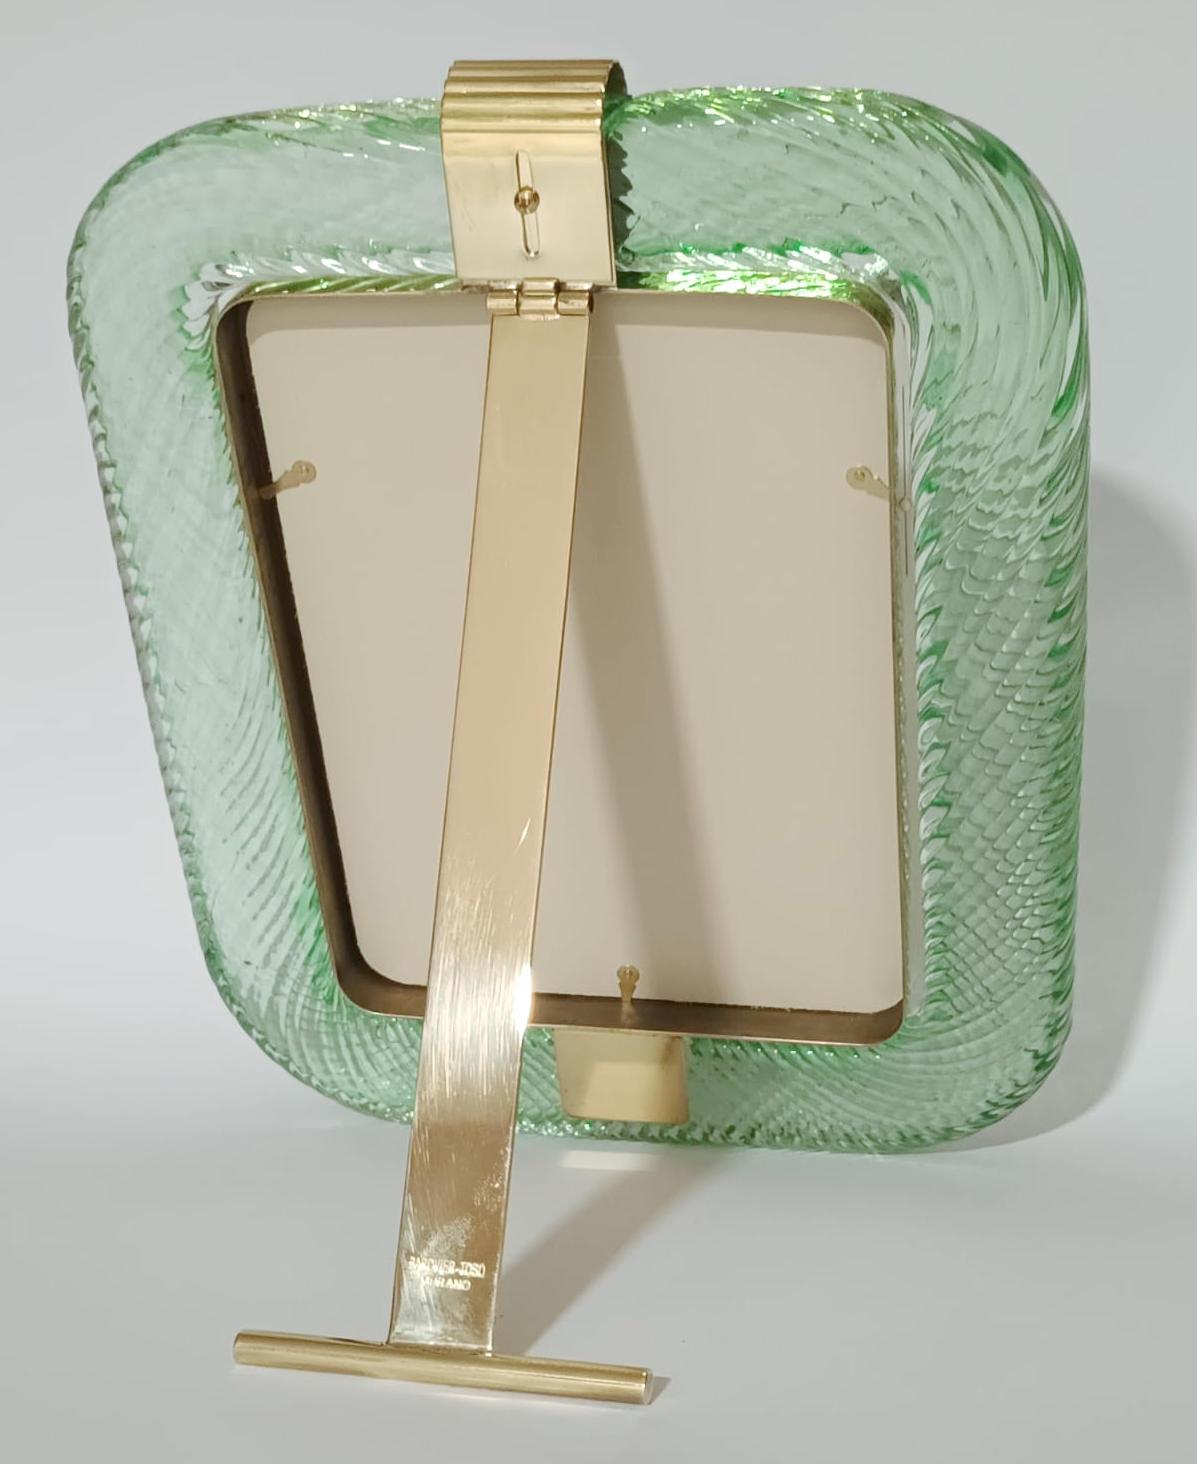 20th Century Murano Green Photo Frame by Barovier e Toso - 3 Available For Sale